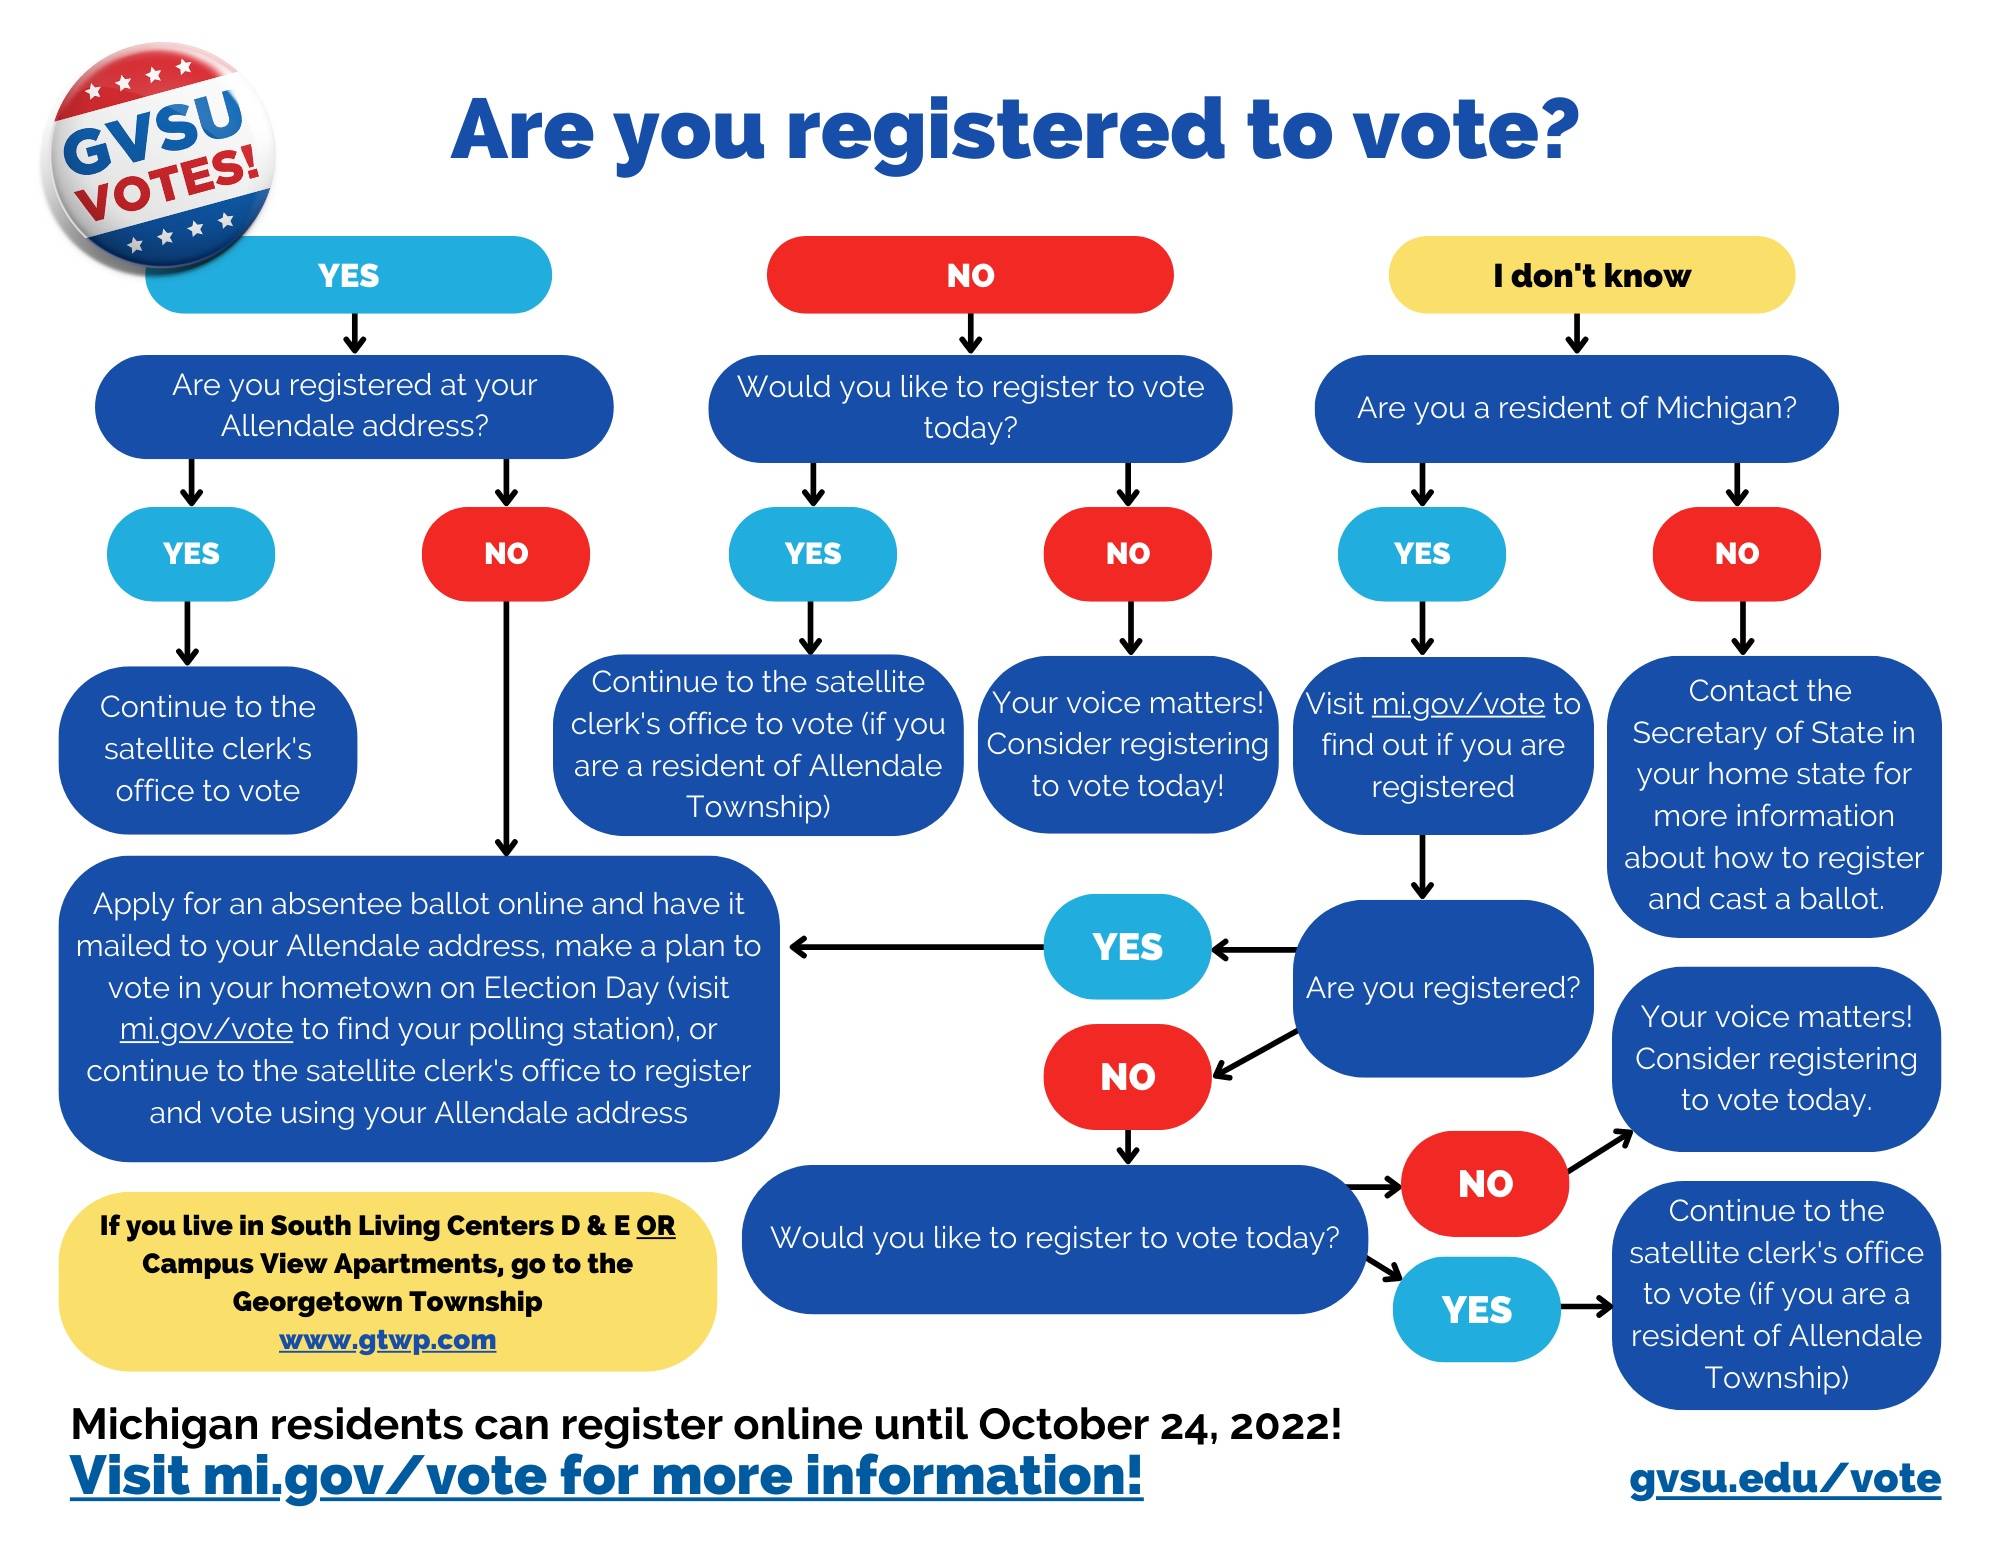 If you are registered at your Allendale residence you can continue to the satellite clerk's office to vote. If you are not registered to vote at your Allendale residence you can apply for an absentee ballot online and have it mailed to your Allendale address, make a plan to vote in your hometown on Election Day (visit mi.gov/vote to find your polling station) or continue to the satellite clerk&#8217;s office to register and vote sign your Allendale address.   If you live in South living Centers D & E OR Campus View Apartments. Go to the Georgetown Township www.gtwp.com  If you are not registered to vote and would like to register to vote today you can continue to the satellite clerk&#8217;s office to vote (If you are a resident of Allendale Township). If you are not registered to vote and would not like to register your voice matters! Consider registering to vote today!   If you are unsure if you are registered to vote don&#8217;t worry. If you are a Michigan resident visit mi.gov/vote to find out if you are registered. If you are registered you can apply for an absentee ballot online and have it mailed to your Allendale address. If you are not registered and would like to be registered you can continue to the satellite clerk&#8217;s office to vote (if you are a resident of Allendale)   If you are not a resident of Michigan you can contact the Secretary of State in your home state for more information about how to register and cast a ballot.   Visit mi.gov/vote for more information!